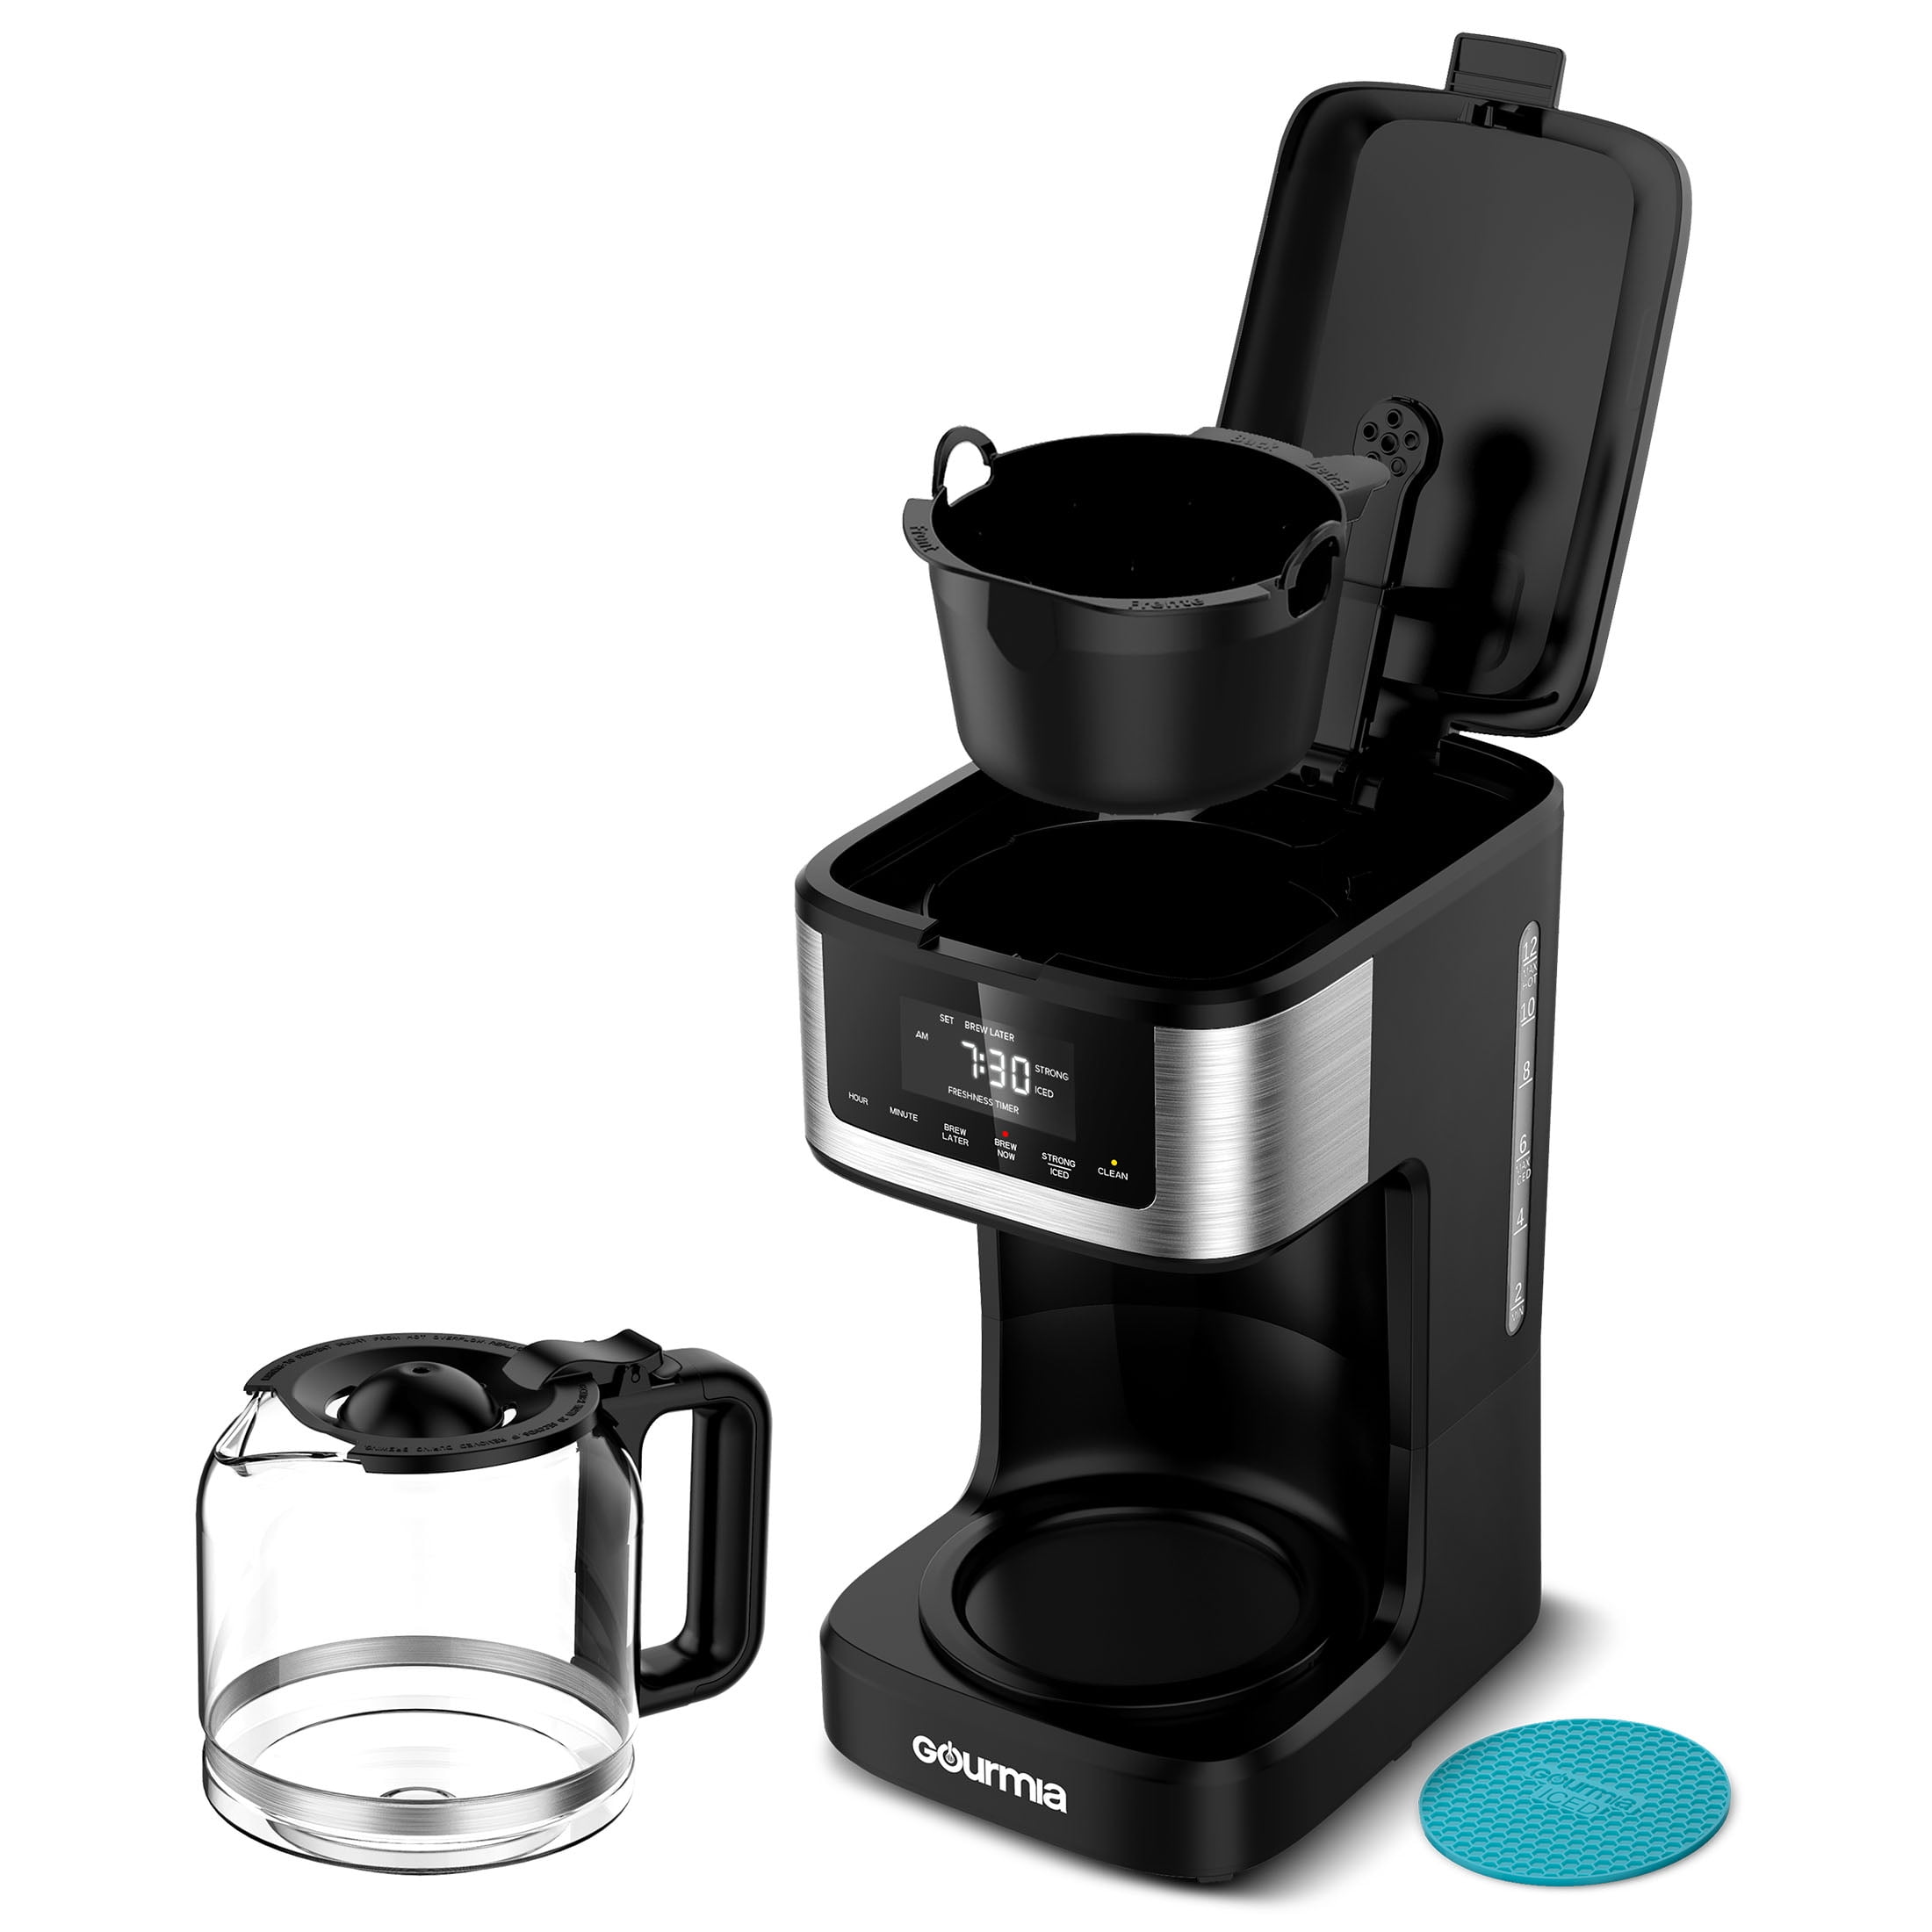 skyehomo 12 Cup Drip Coffee Maker with Built-in Burr Coffee Grinder, Programmable Coffee Machine with Timer, Glass Carafe, Re